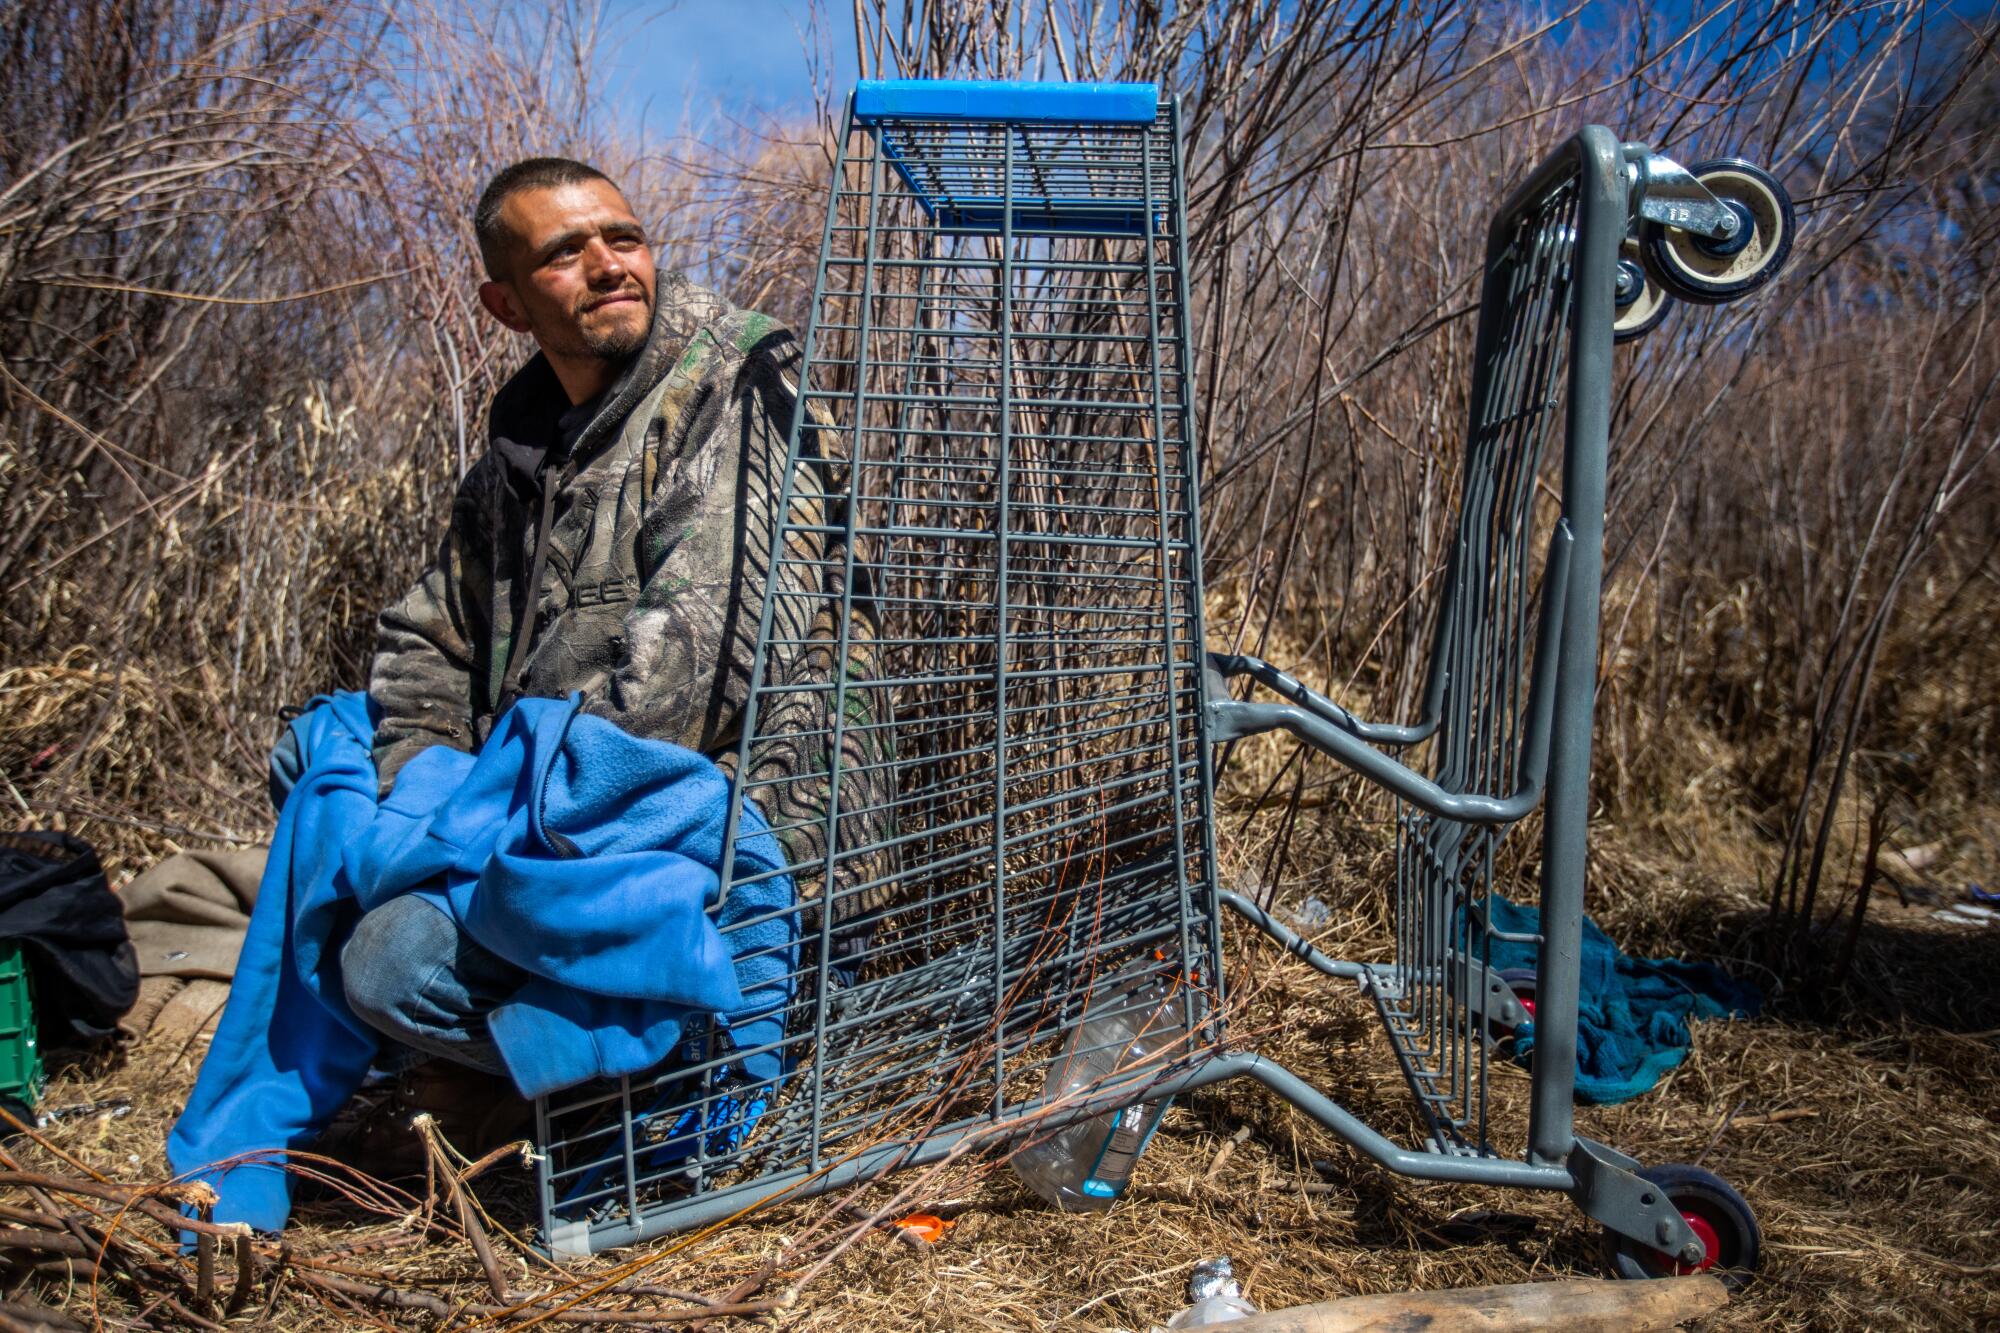  A man sits in an overturned shopping cart in a dry marsh amid little 